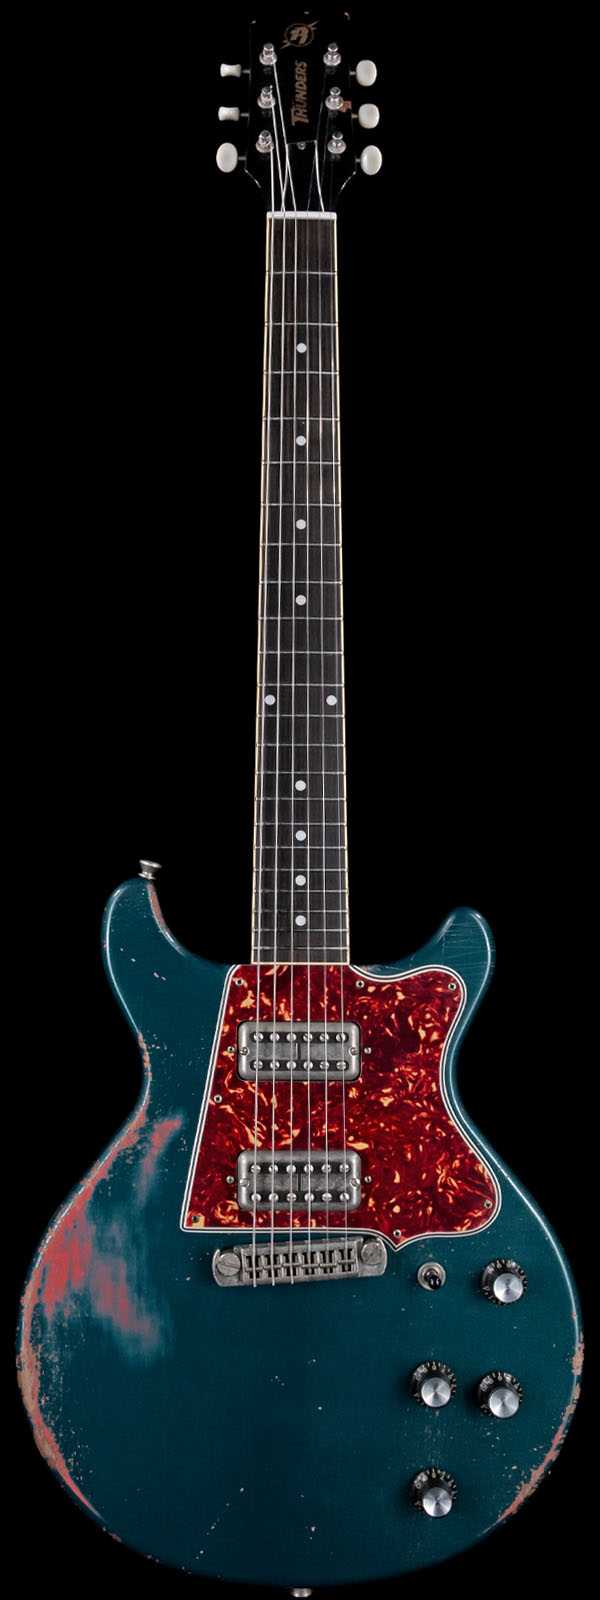 Rock N Roll Relics Thunders II DC Medium Aged Ocean Turquoise over Fiesta Red